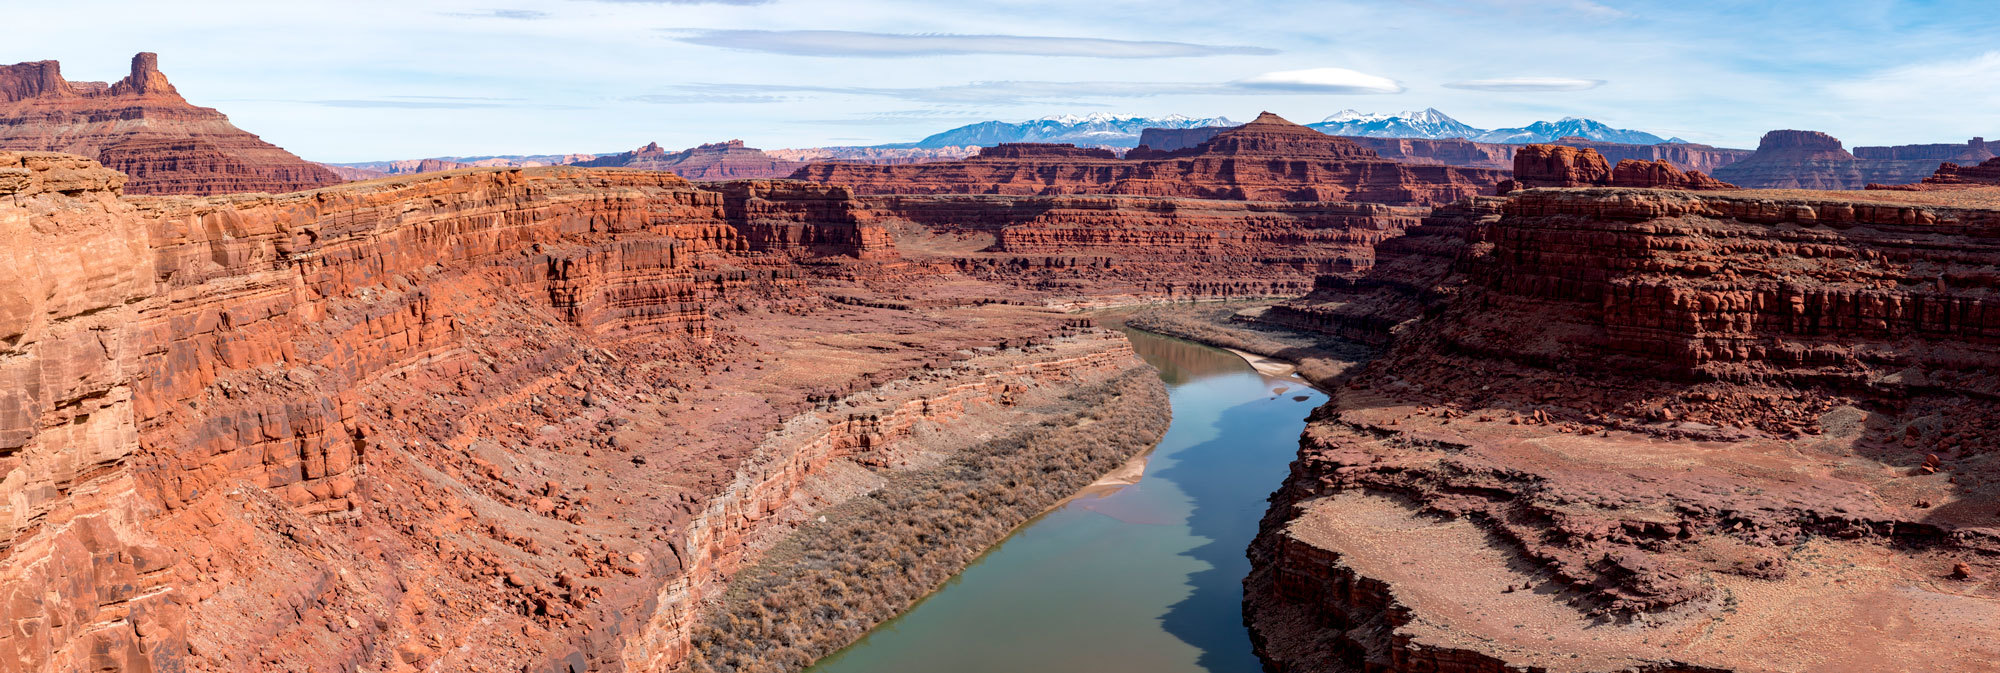 The West’s Great River Hits Its Limits: Will the Colorado Run Dry?